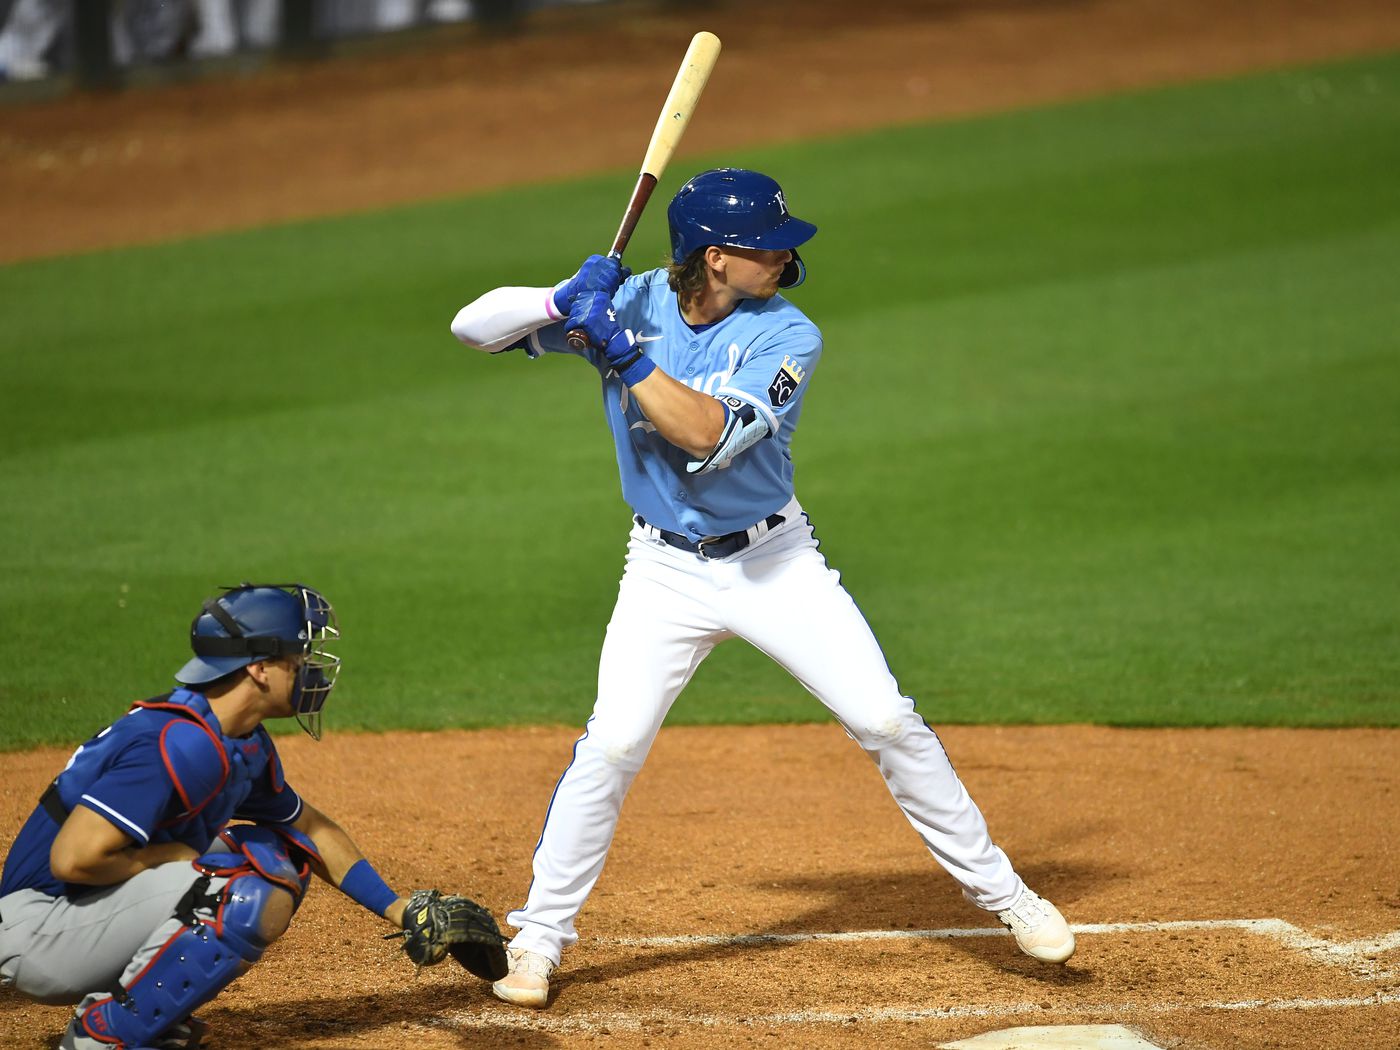 Bobby Witt Jr. first hit video: Watch Royals top prospect hit RBI double in debut [VIDEO]